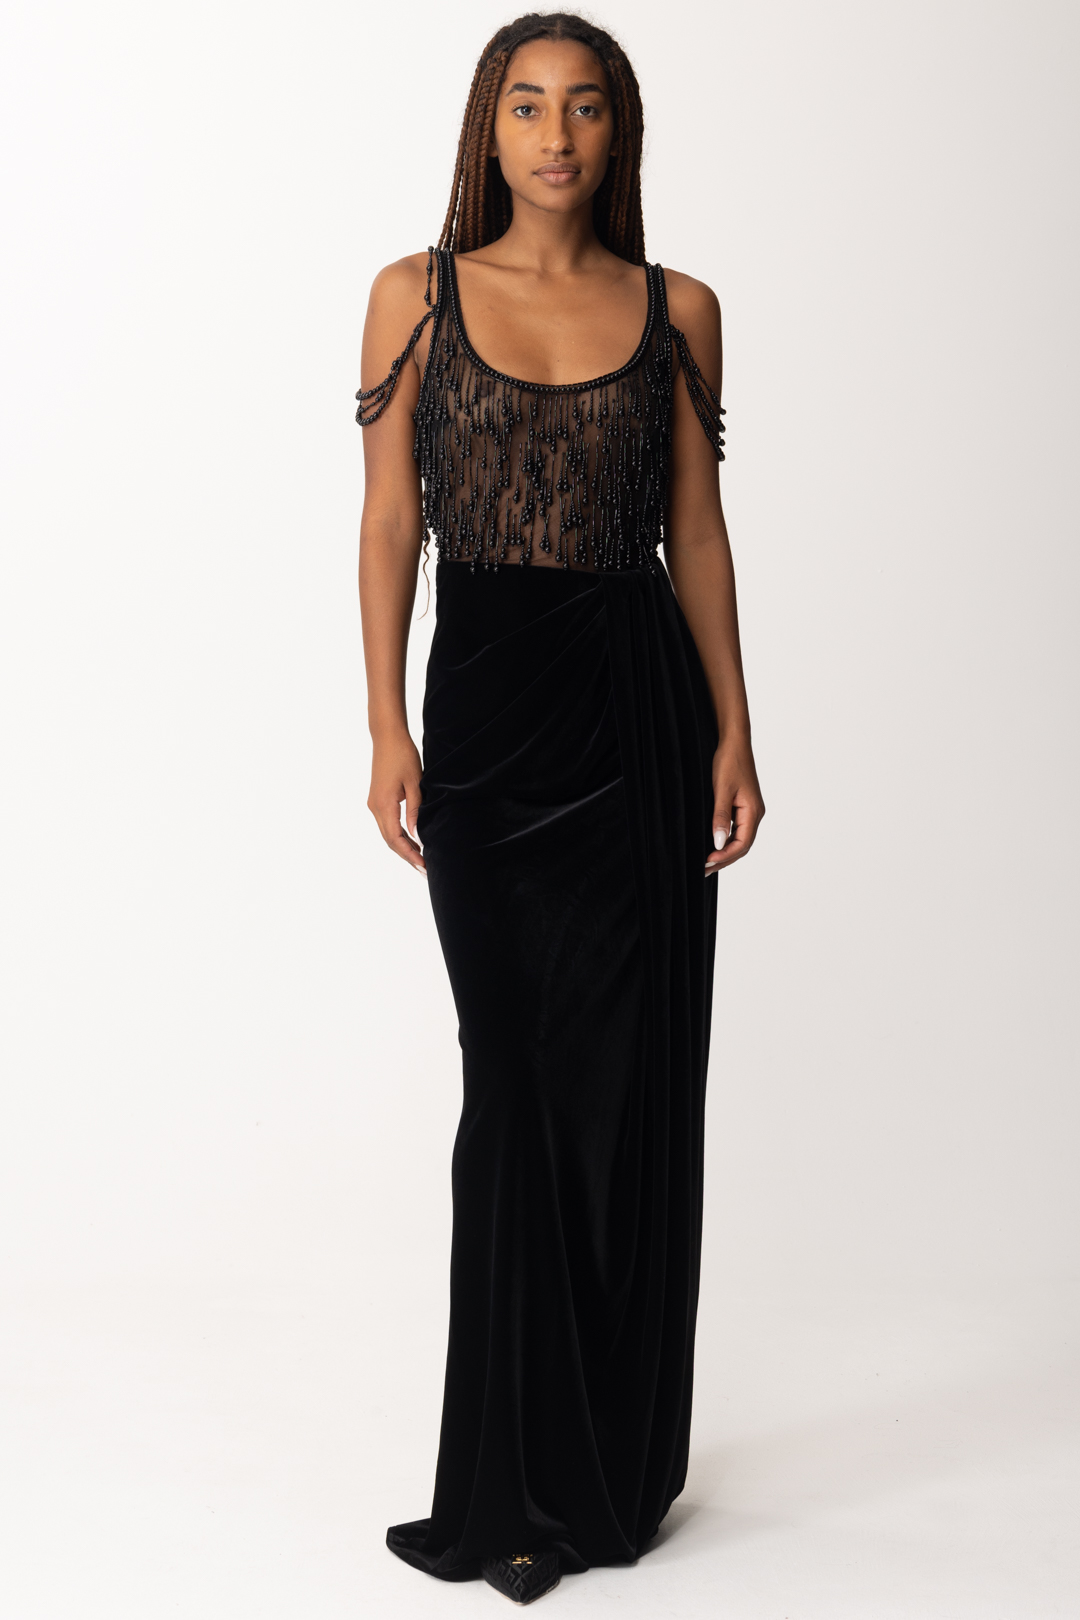 Preview: Elisabetta Franchi Velvet Red carpet dress with pearls embroidery Nero